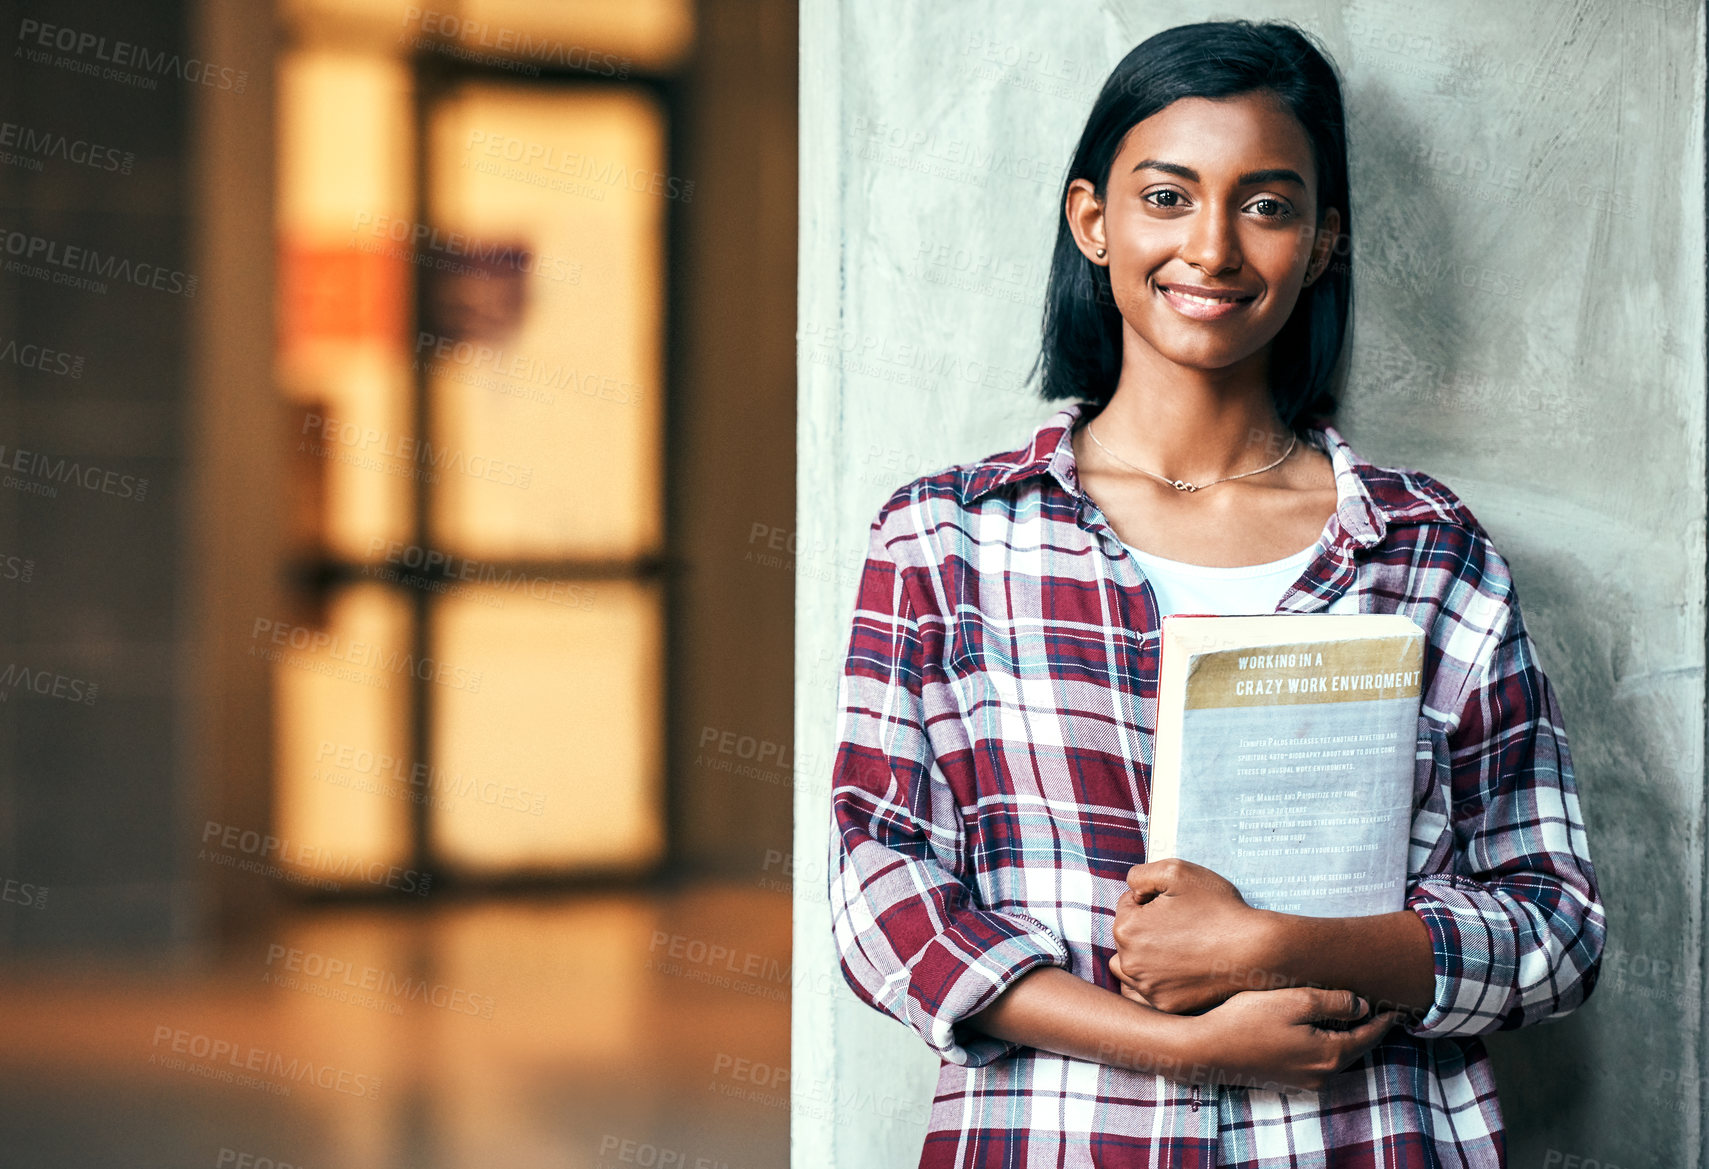 Buy stock photo Portrait of a young female student outside on campus